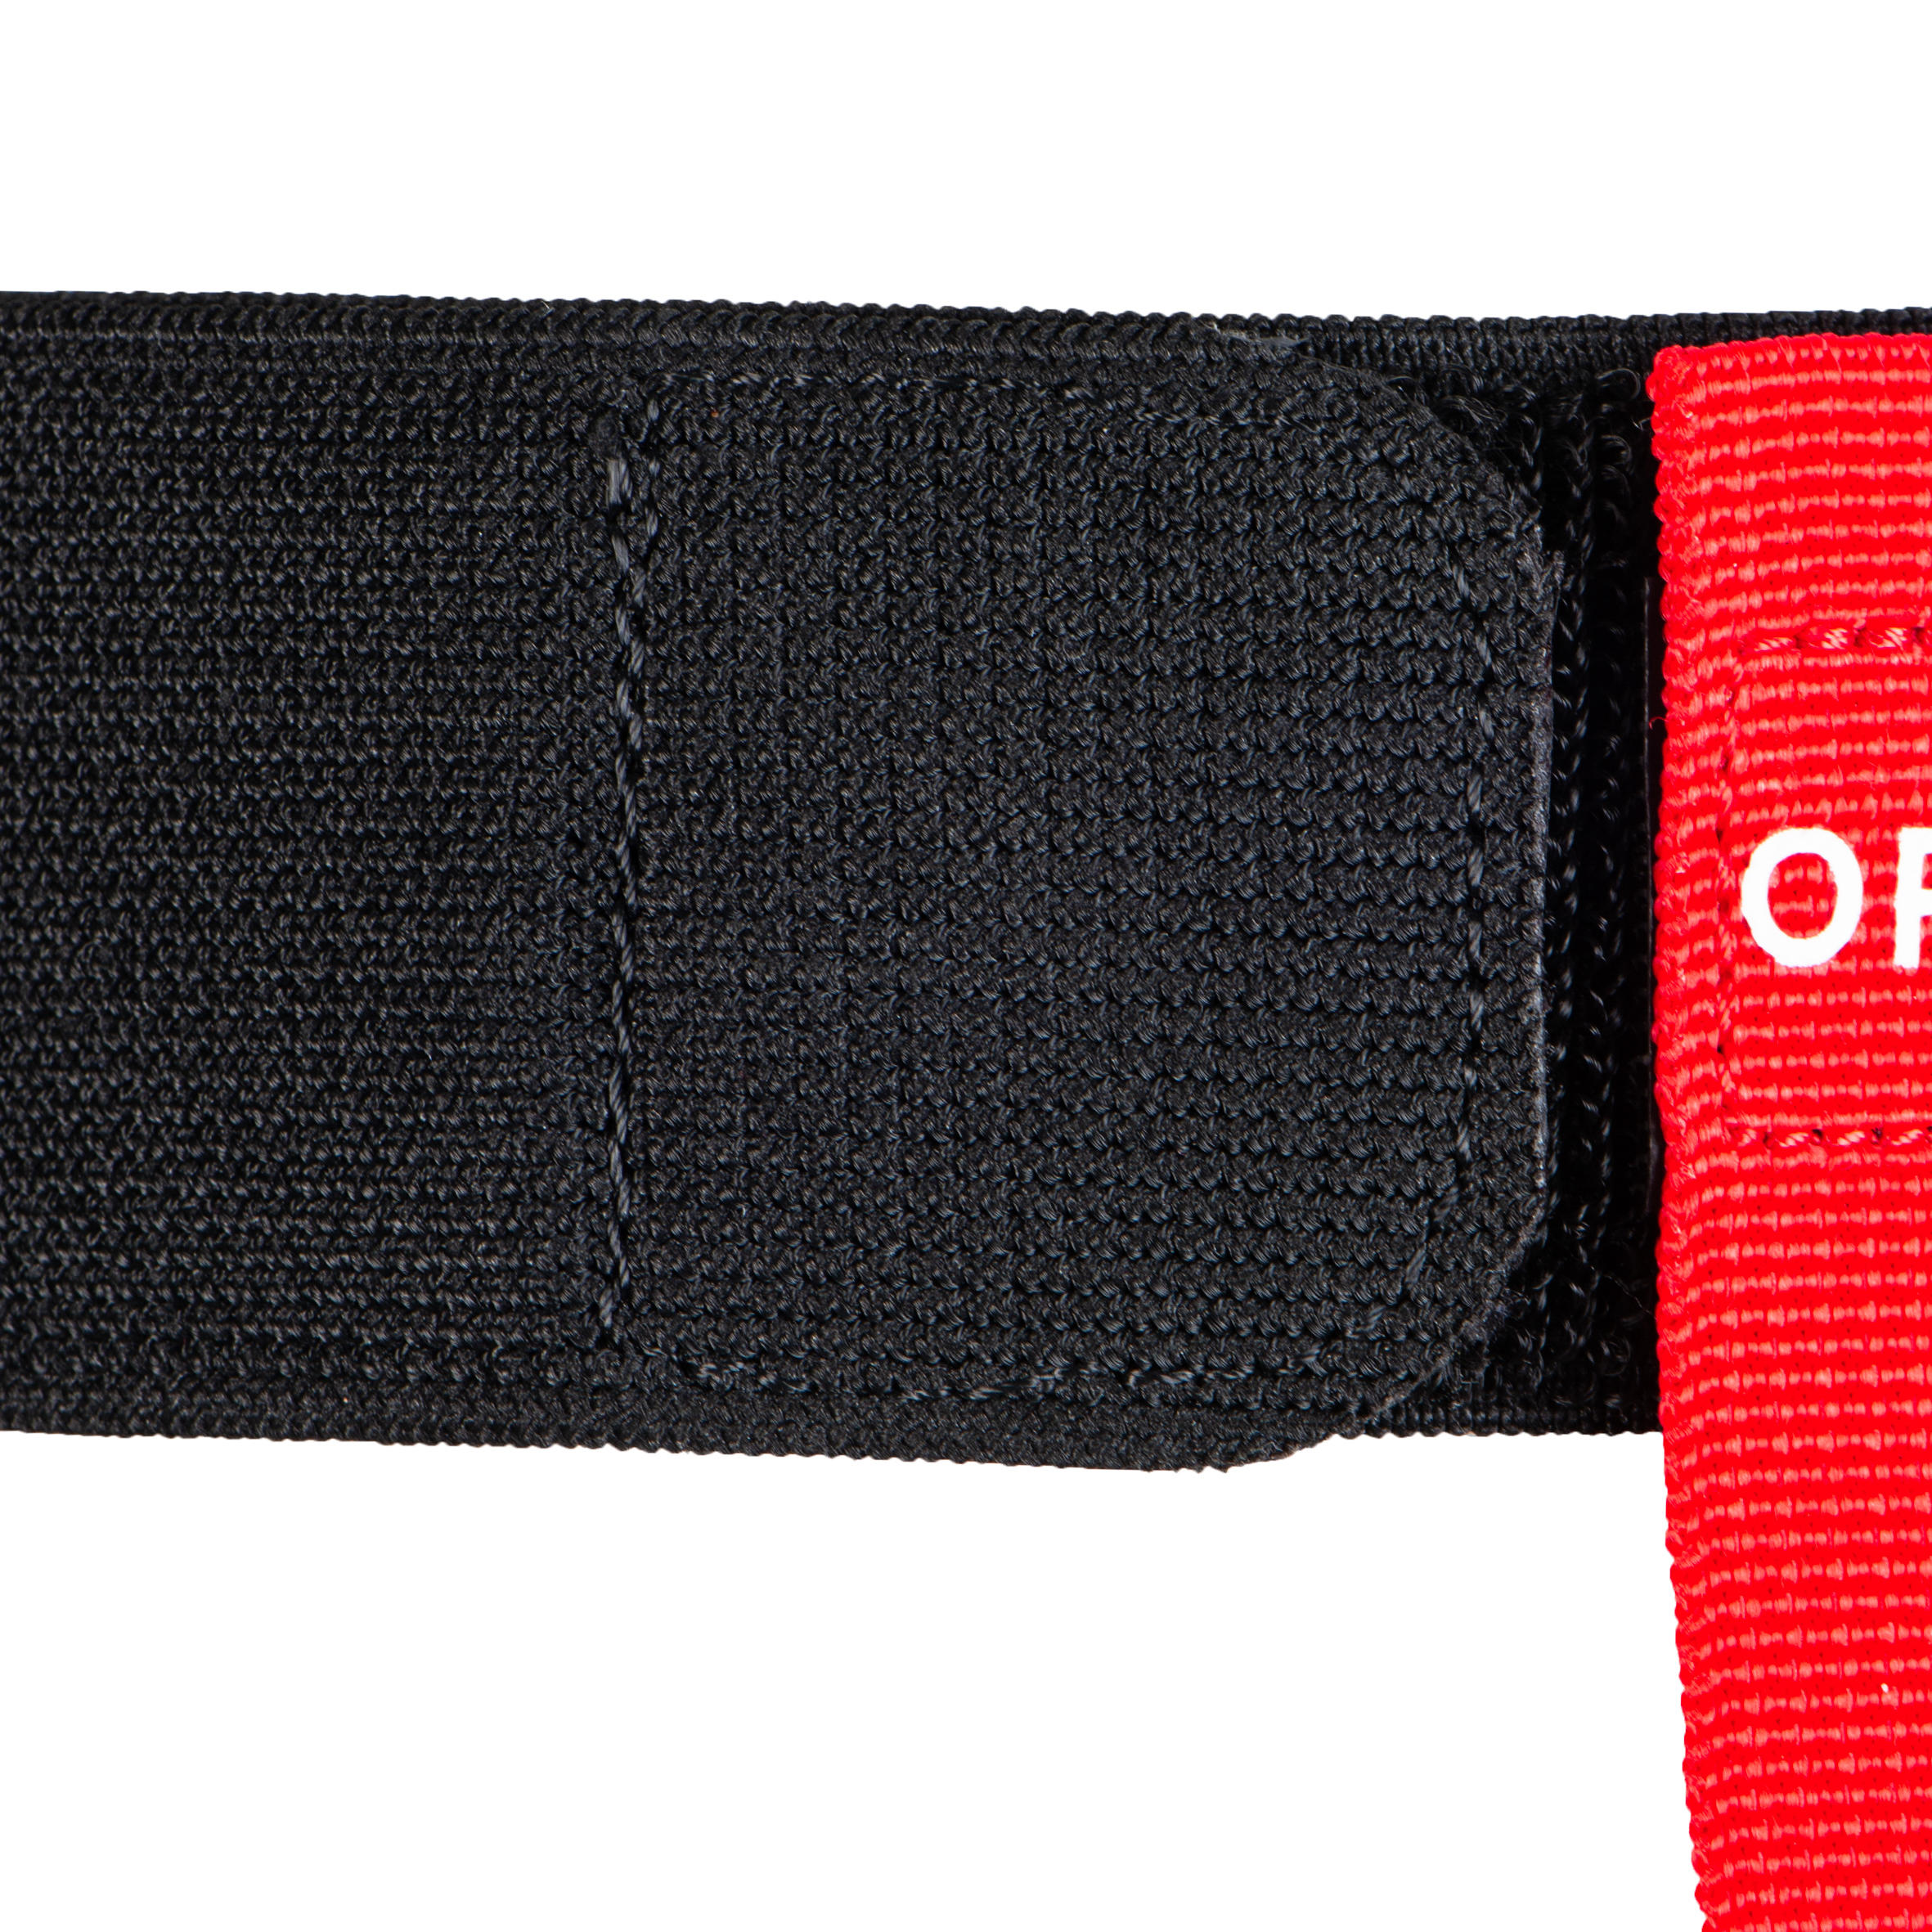 Tag Rugby Belt Kit R500 - Blue/Red 7/10